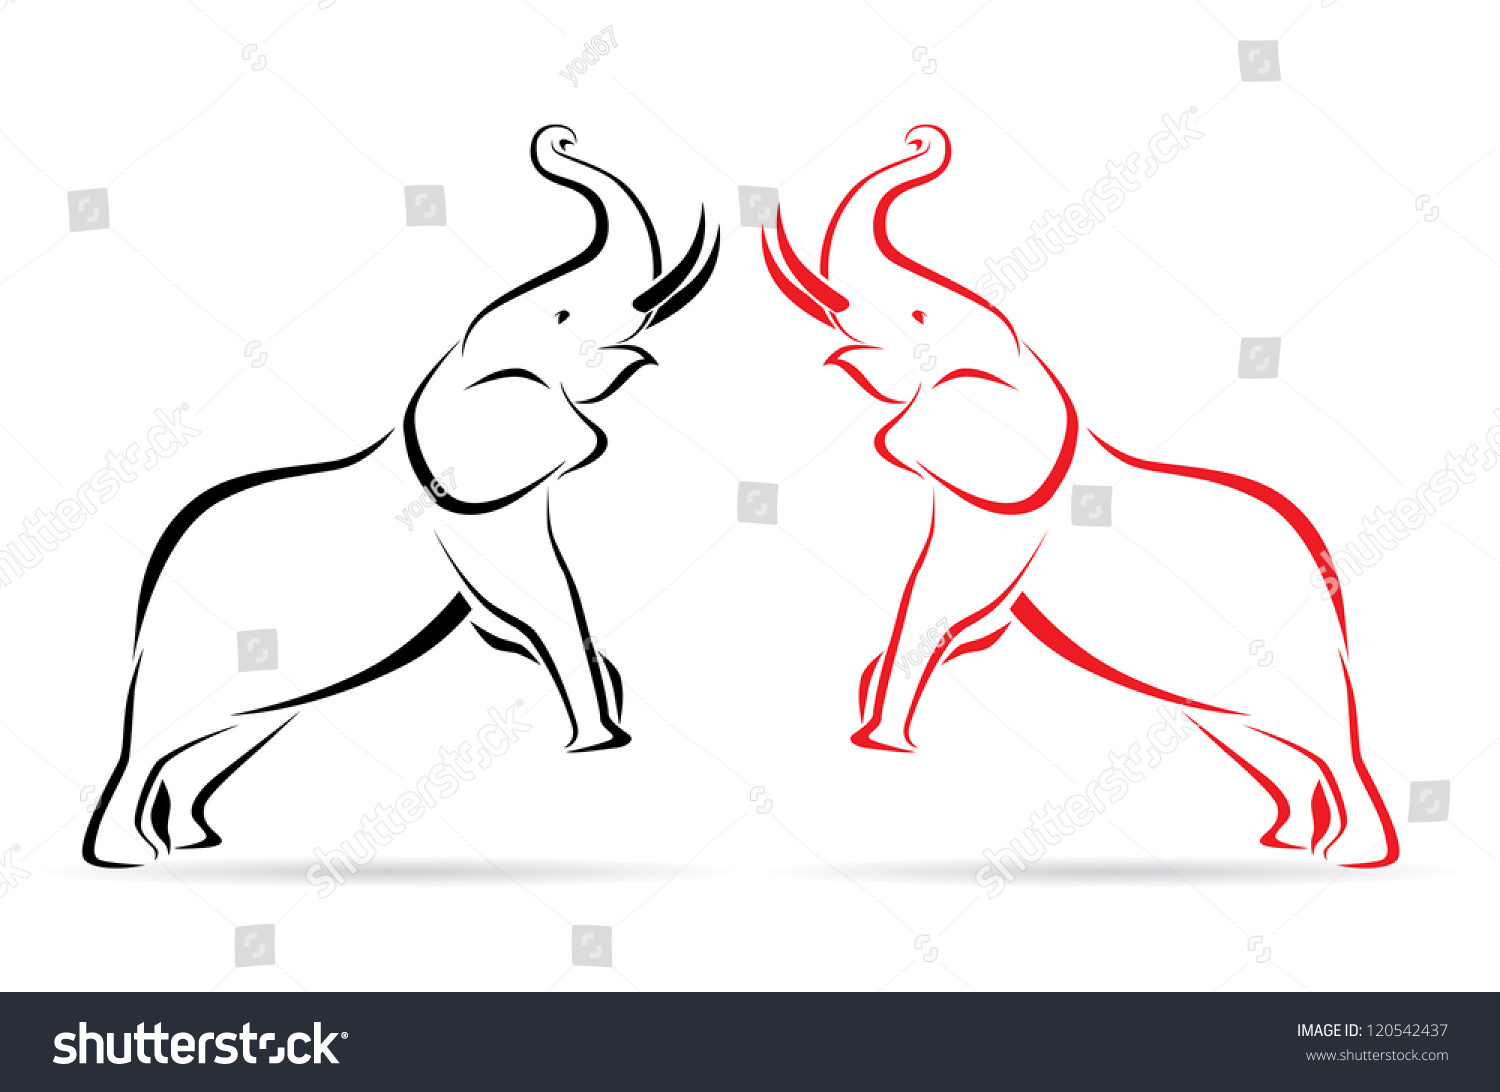 Vector Image Of An Elephant On A White Background - 120542437